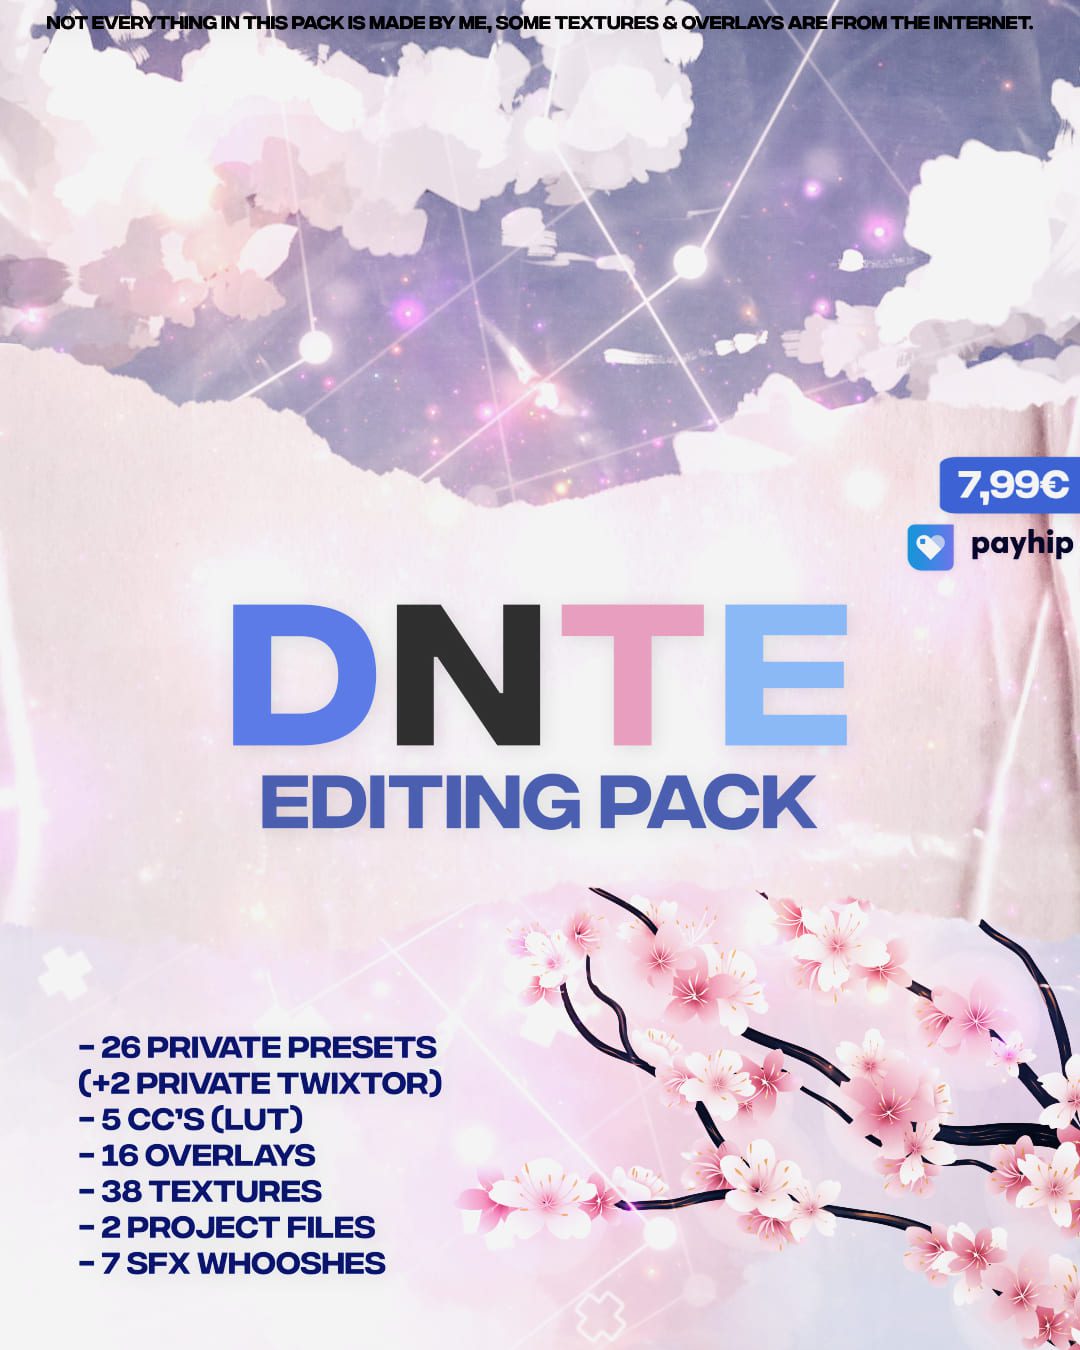 Payhip – Dnte Editing Pack